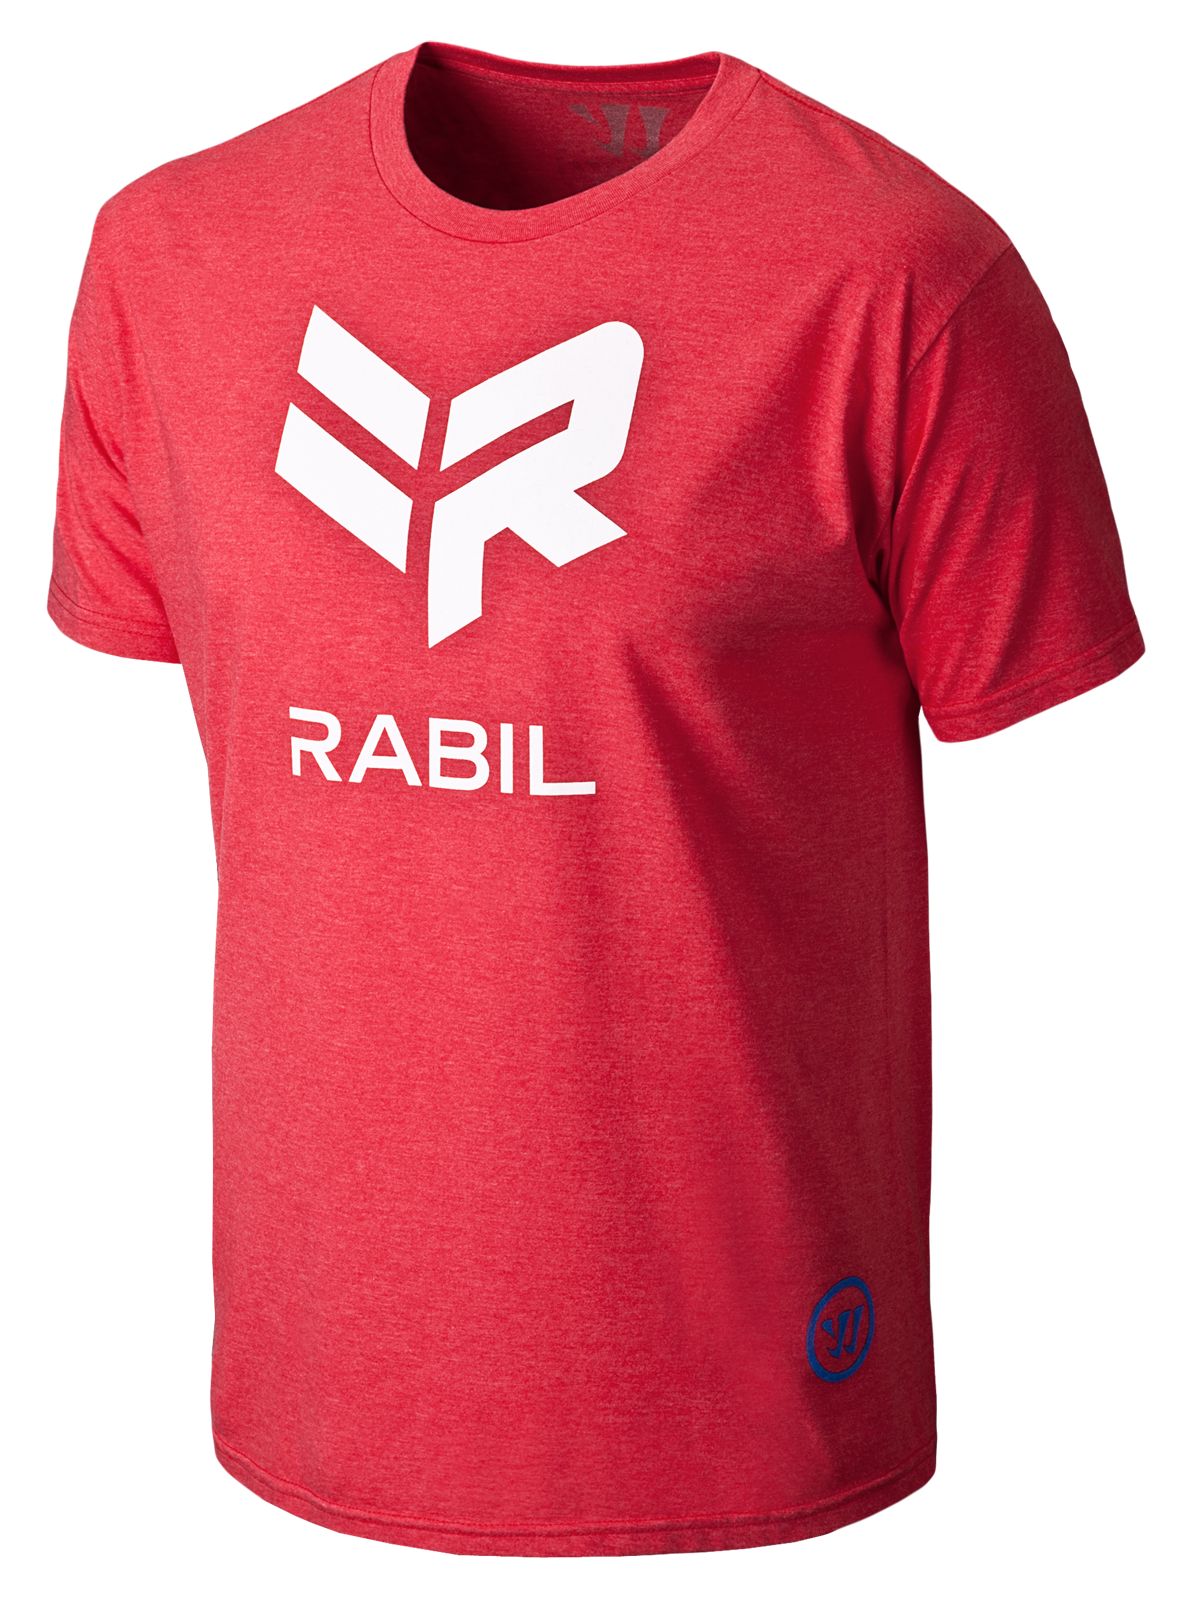 Rabil Logo Tee, Red image number 2